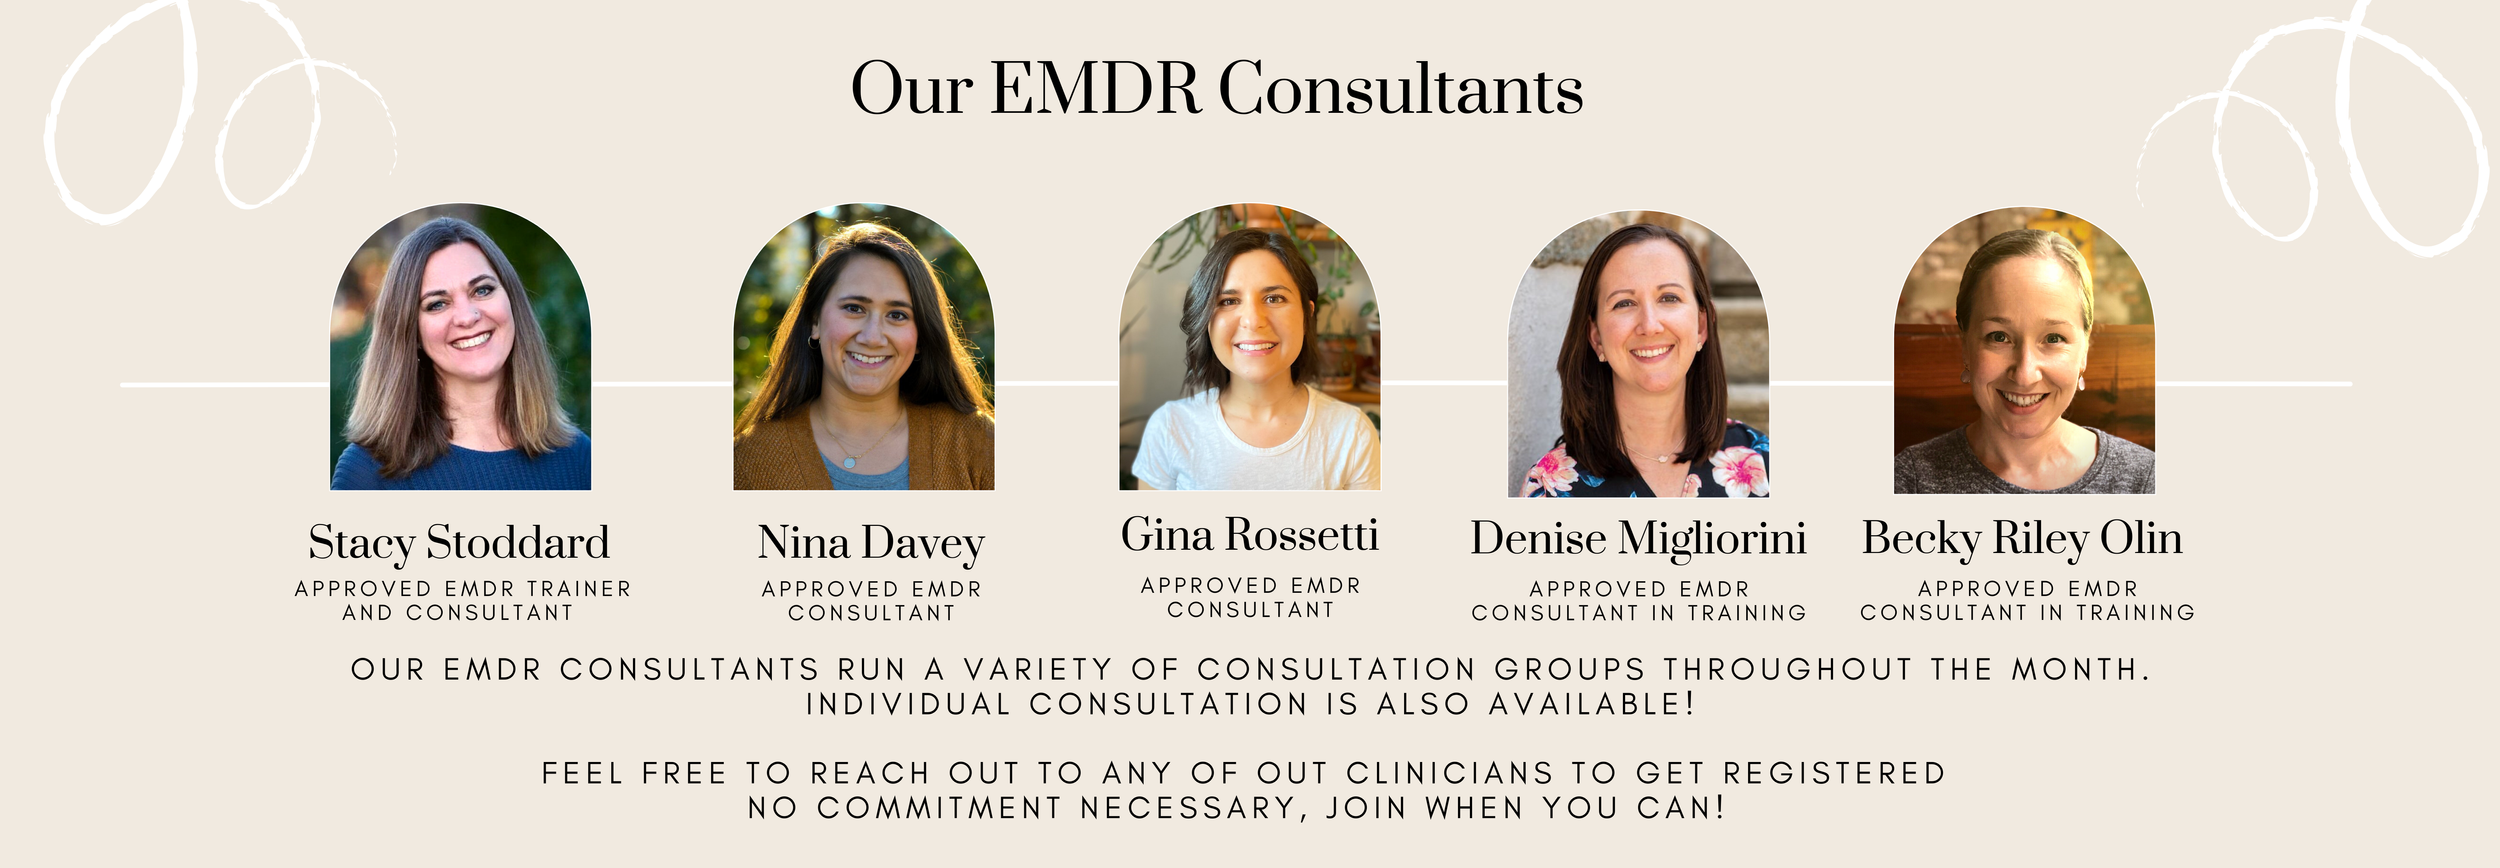 EMDR Consultants-6.png